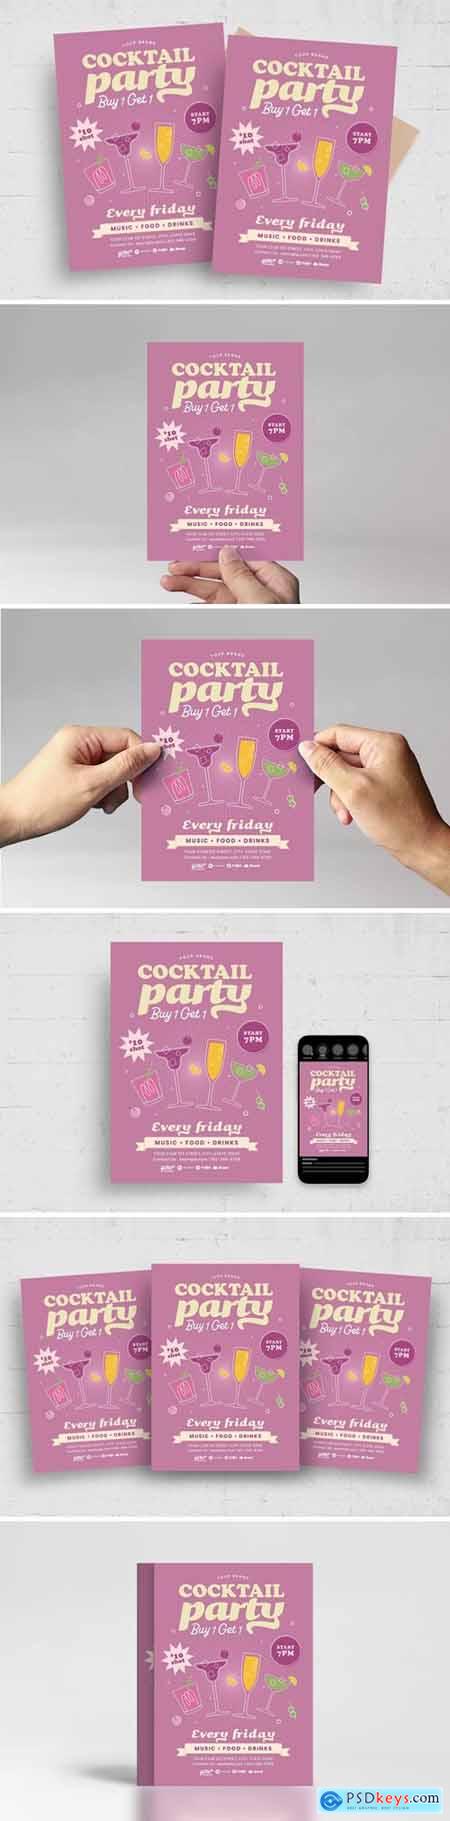 Retro Cocktail Party Flyer Template